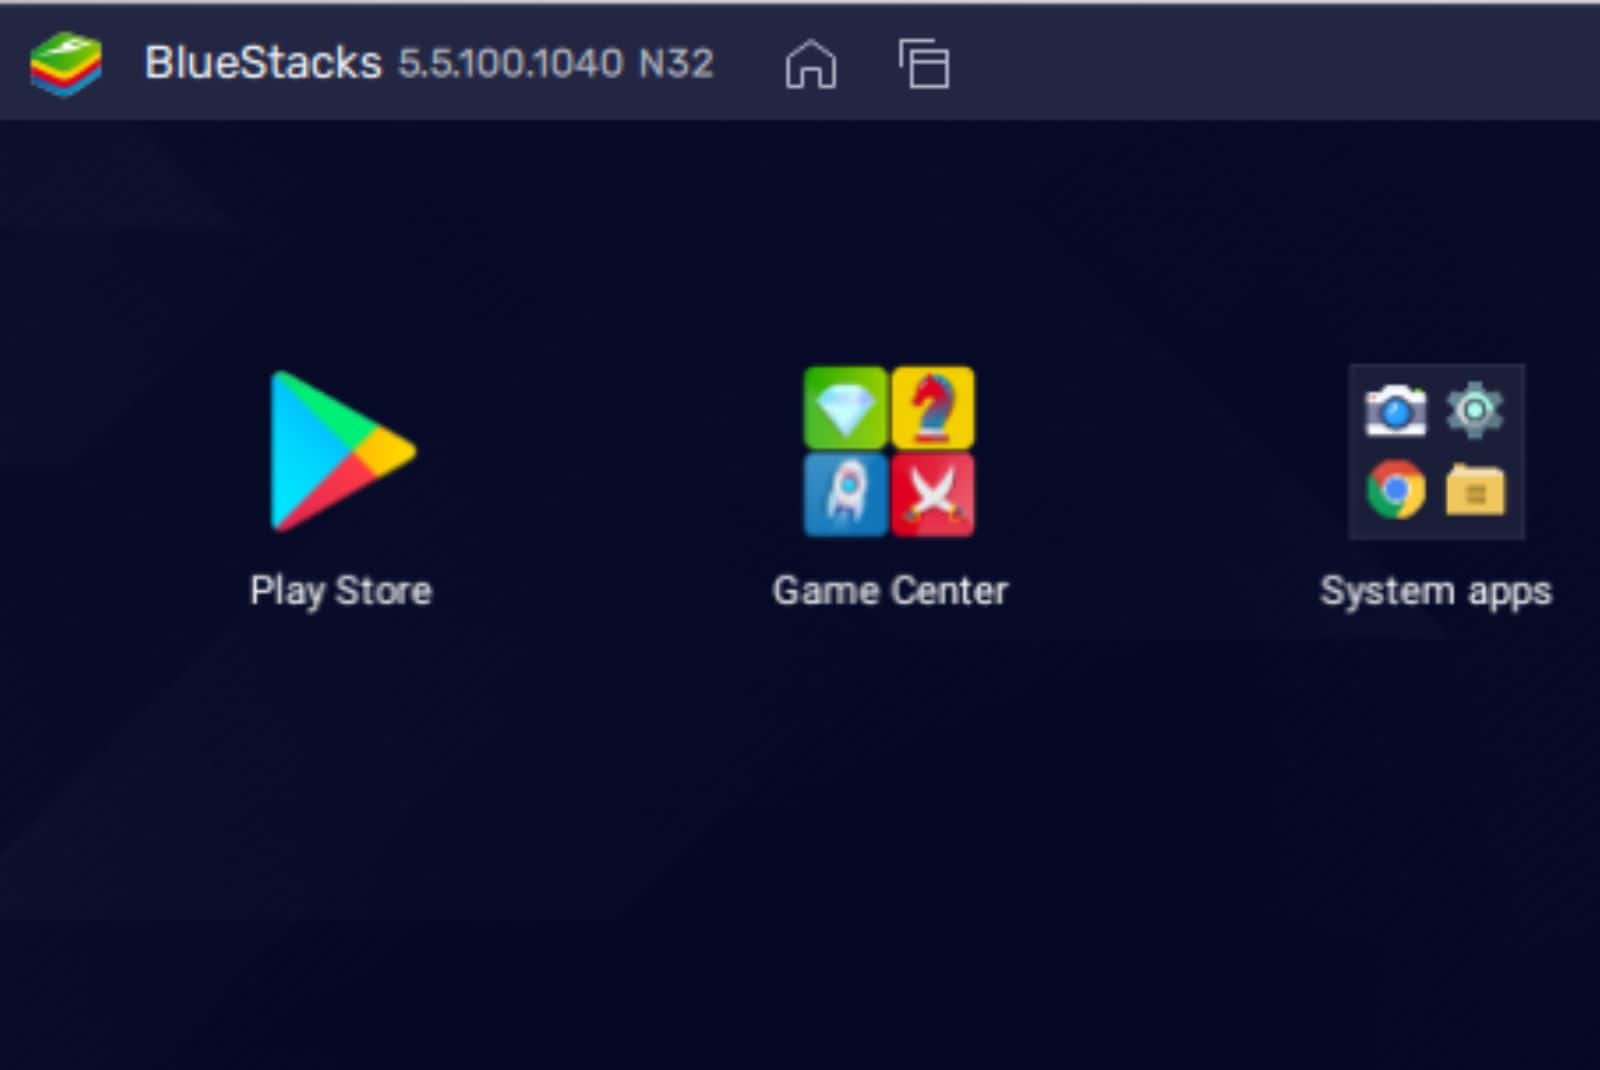 step open bluestacks on the PC to installing Iplwin India app